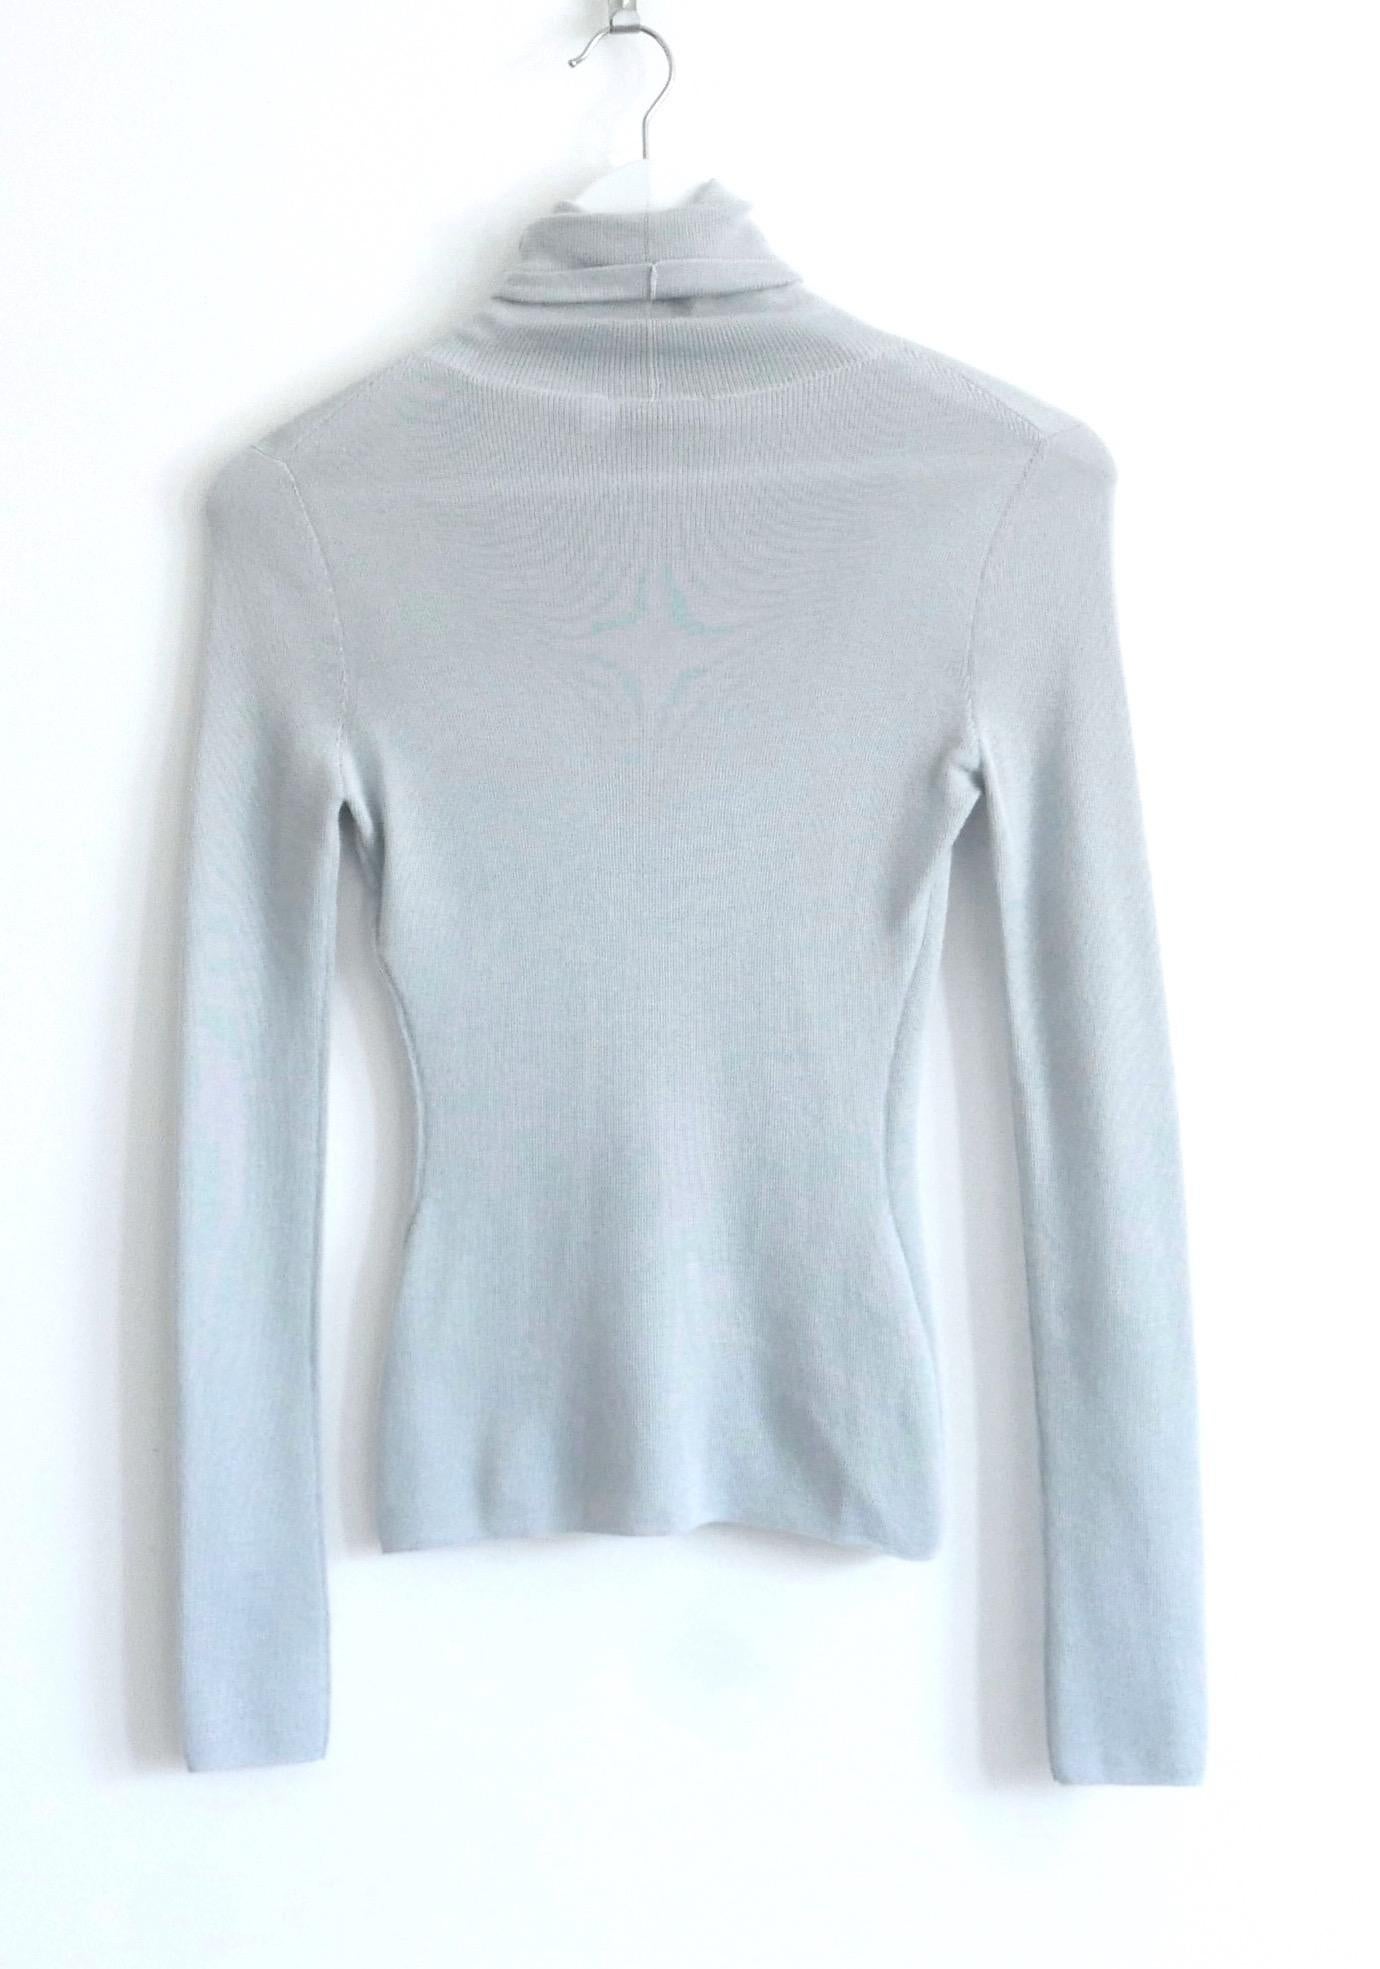 Divine Dior cashmere blend knit top from the Pre-Fall 2014 Collection. Bought for £1250 and unworn. 
Made from fine, super soft duck egg blue cashmere and silk, It has a high neck, a gently tailored shape with long, slim sleeves and silver tone CD